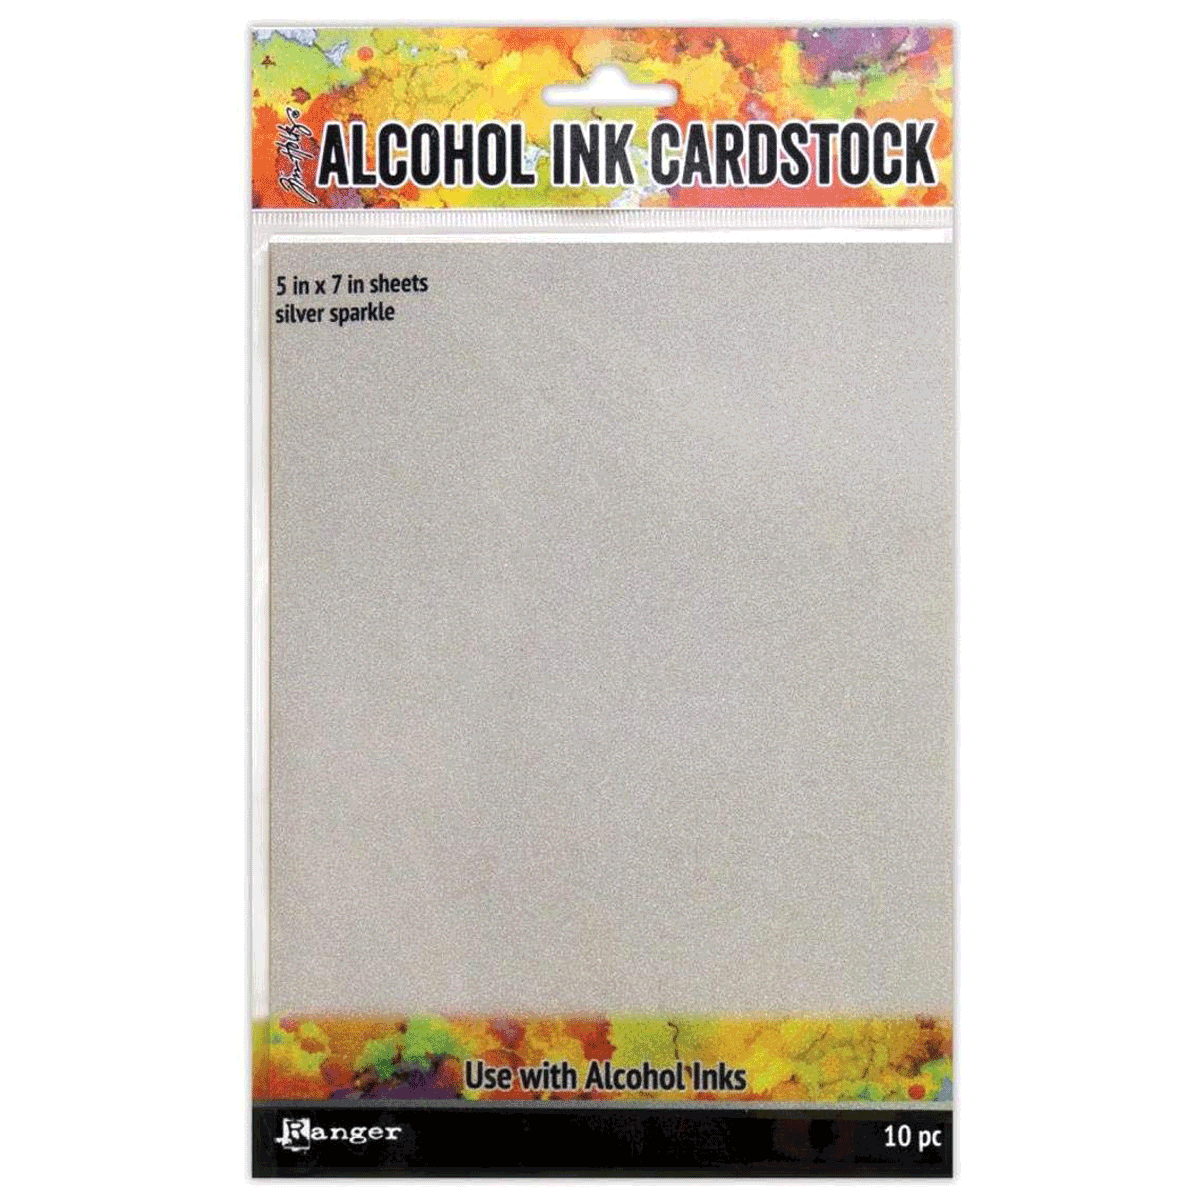 Tim Holtz® Alcohol Ink Cardstock Silver Sparkle (5x7in) 10 pc